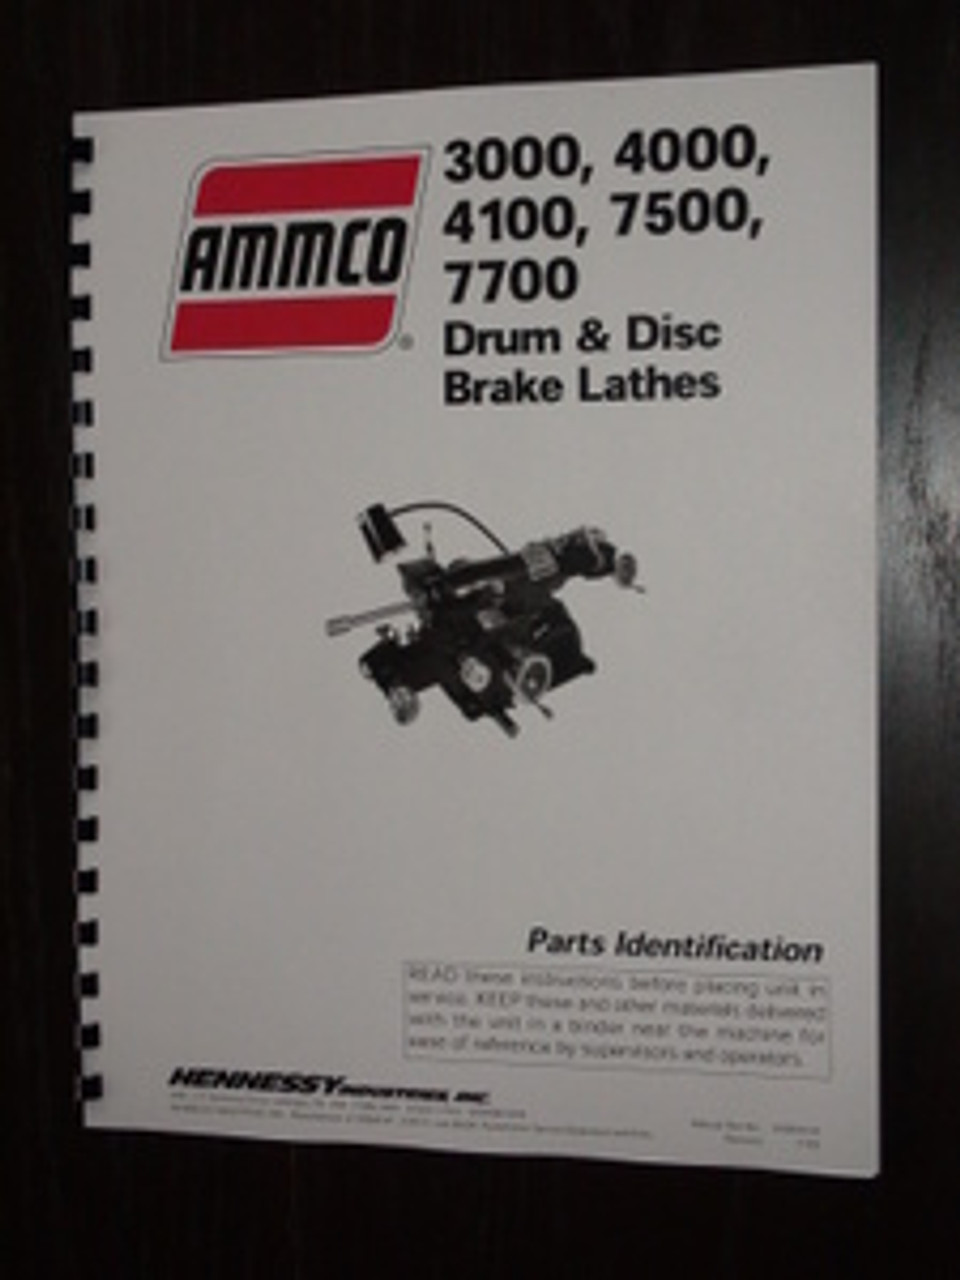 Ammco 3000, 4000, 4100, 7500, 7700 Manual